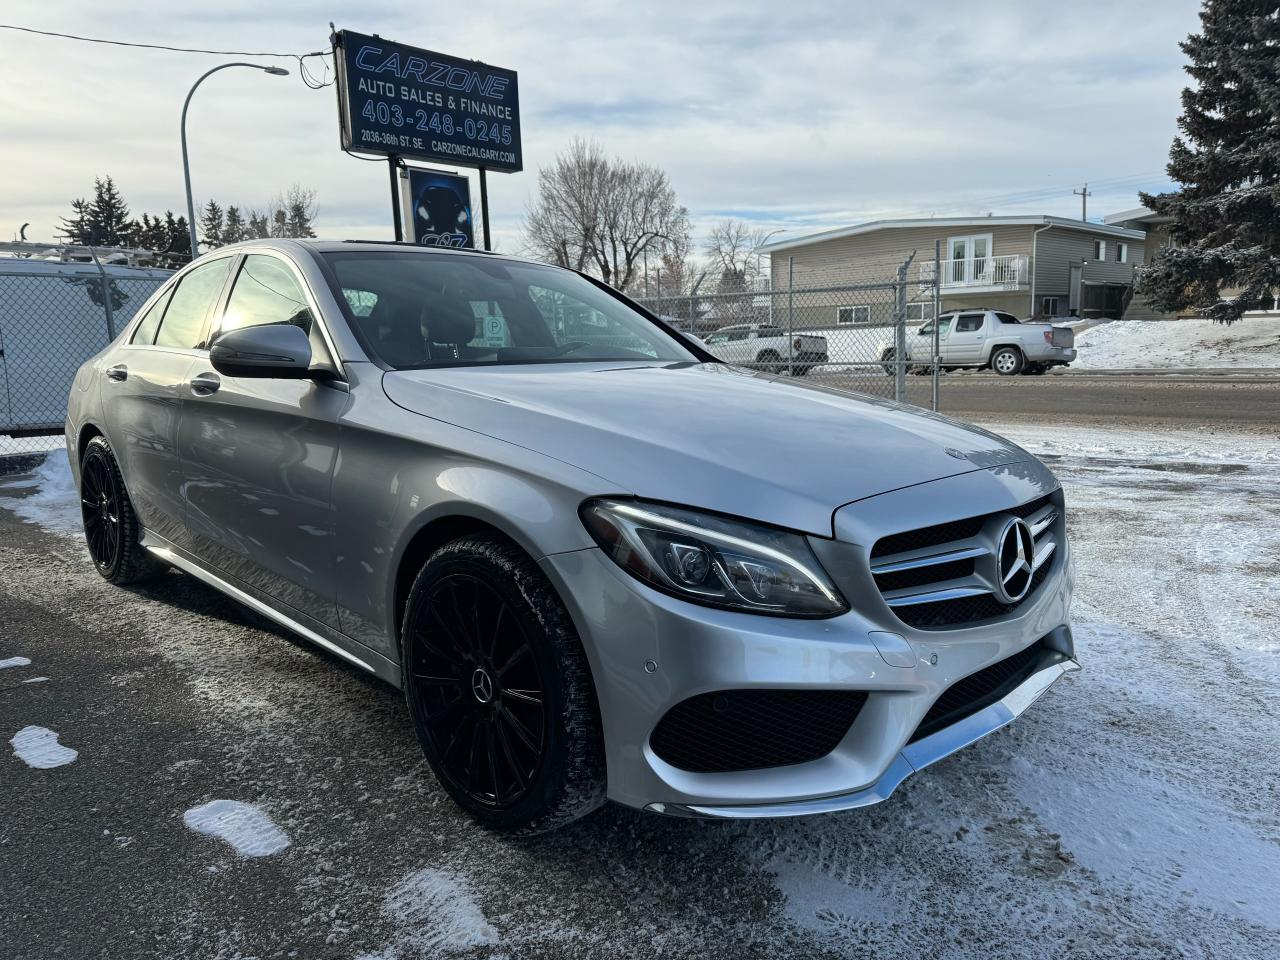 2015 Mercedes-Benz C-Class C300 4MATIC Fully Inspected - Photo #25